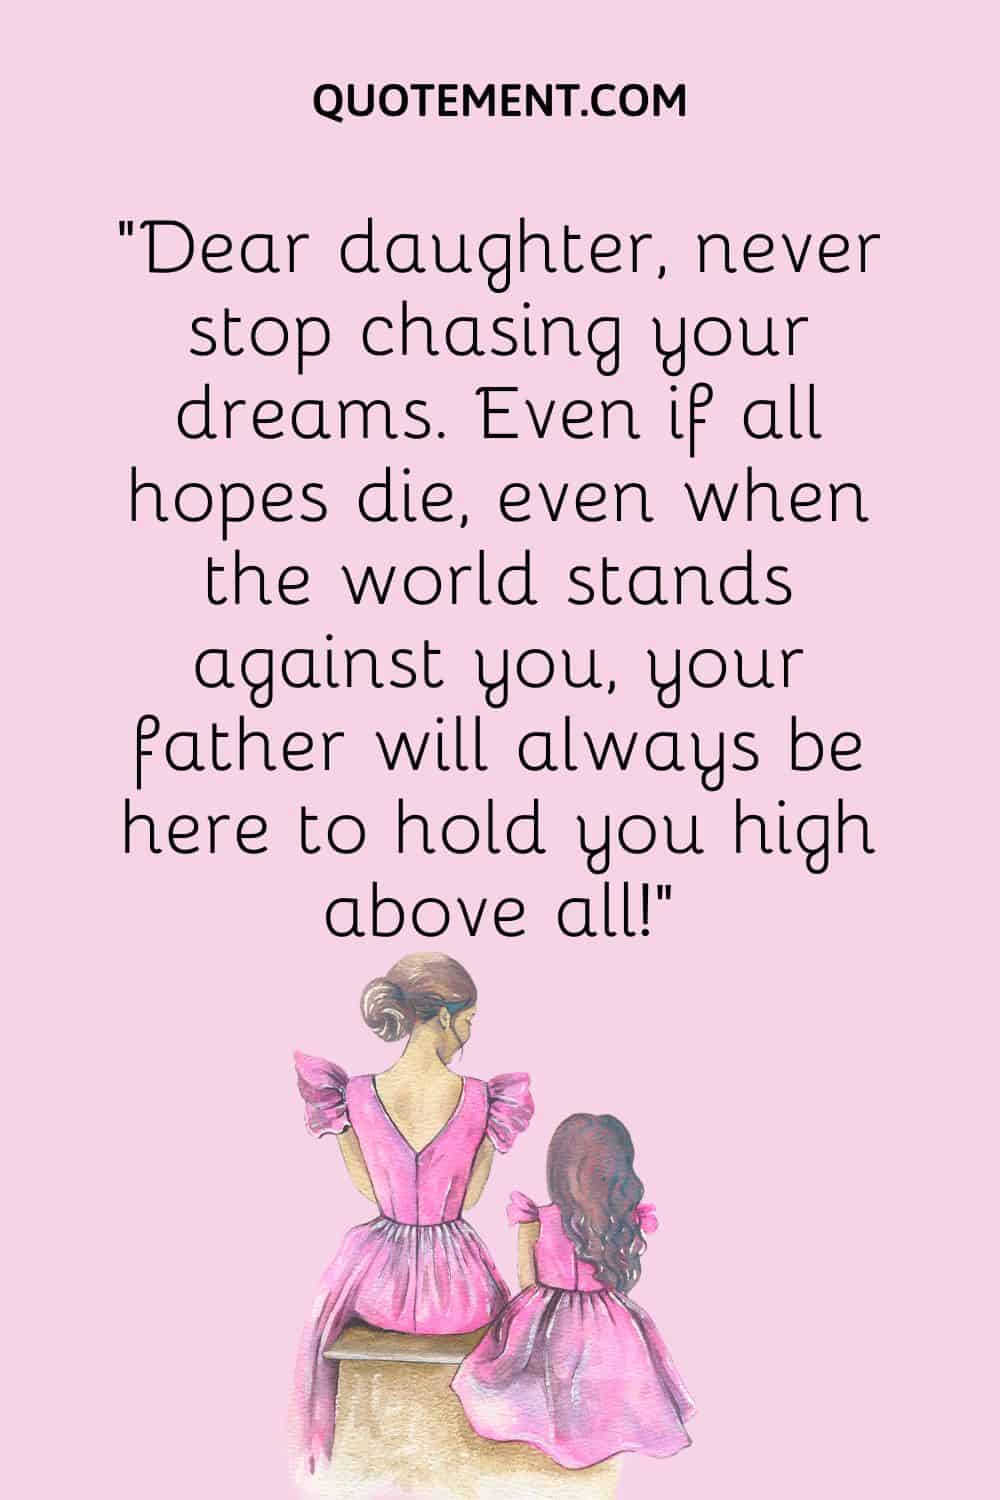 “Dear daughter, never stop chasing your dreams. Even if all hopes die, even when the world stands against you, your father will always be here to hold you high above all!”